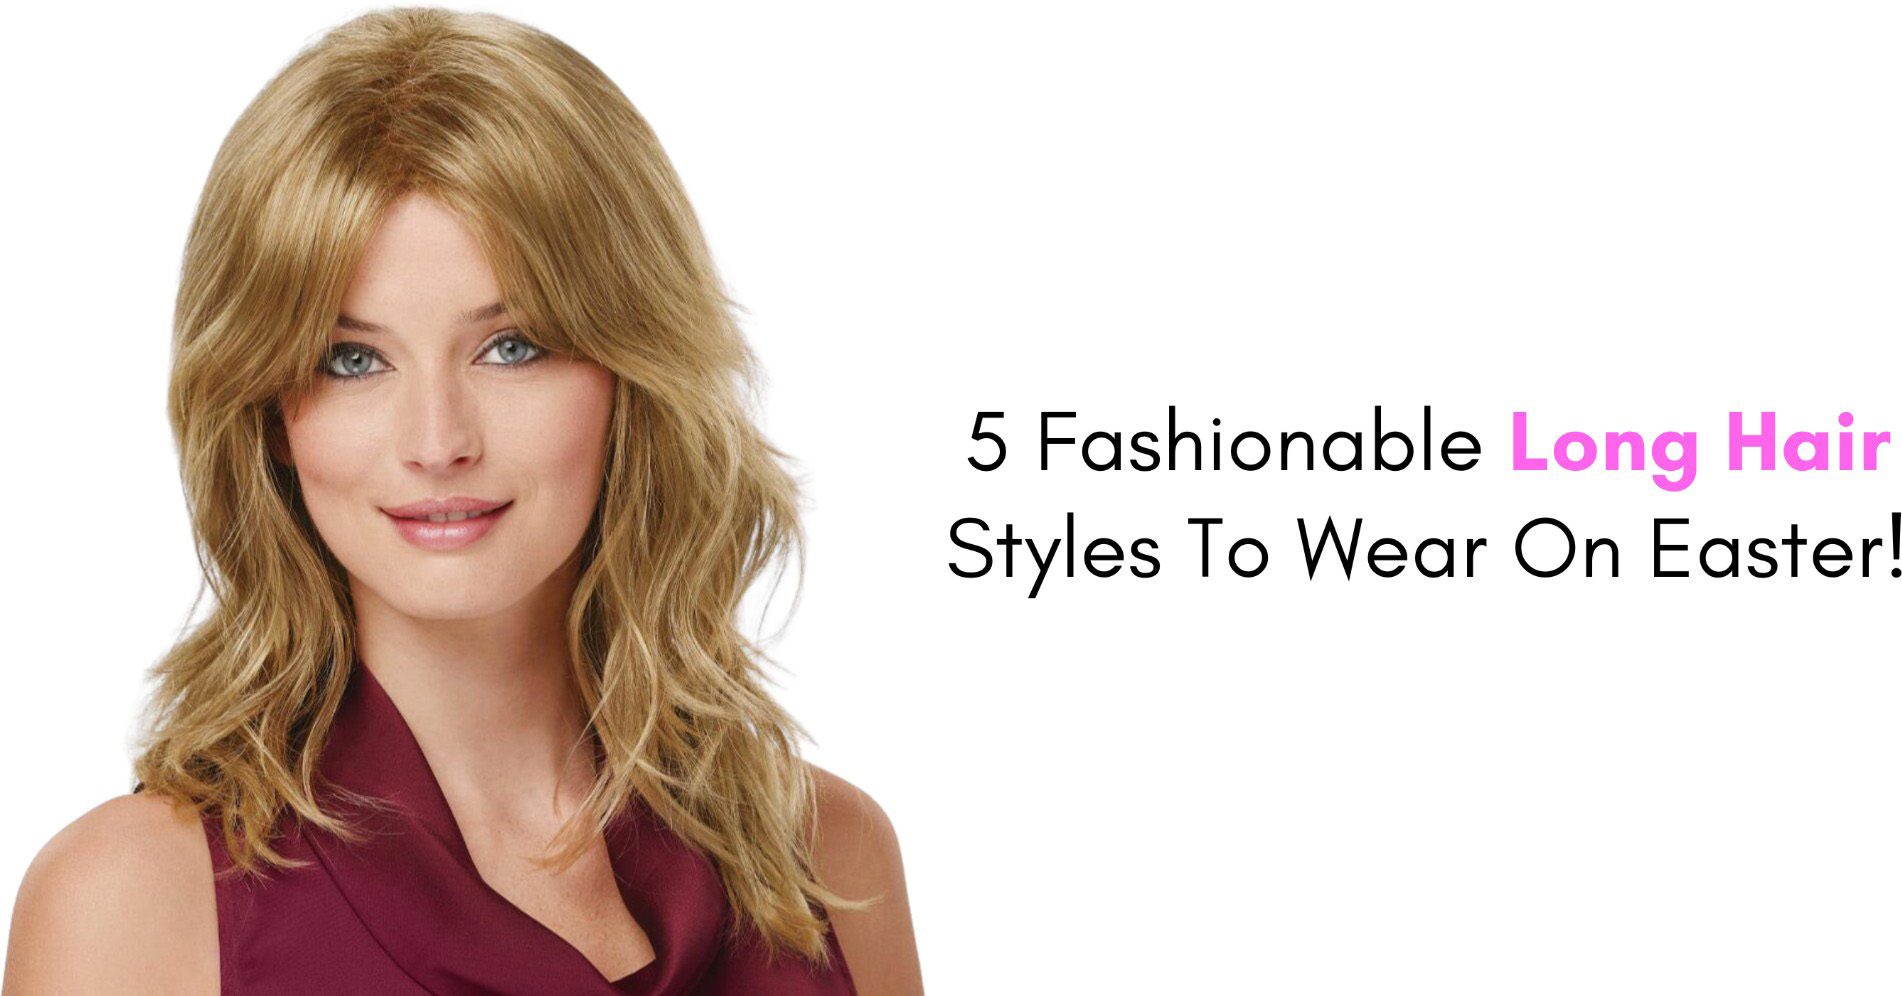 5 Fashionable Long Hair Styles To Wear On Easter!